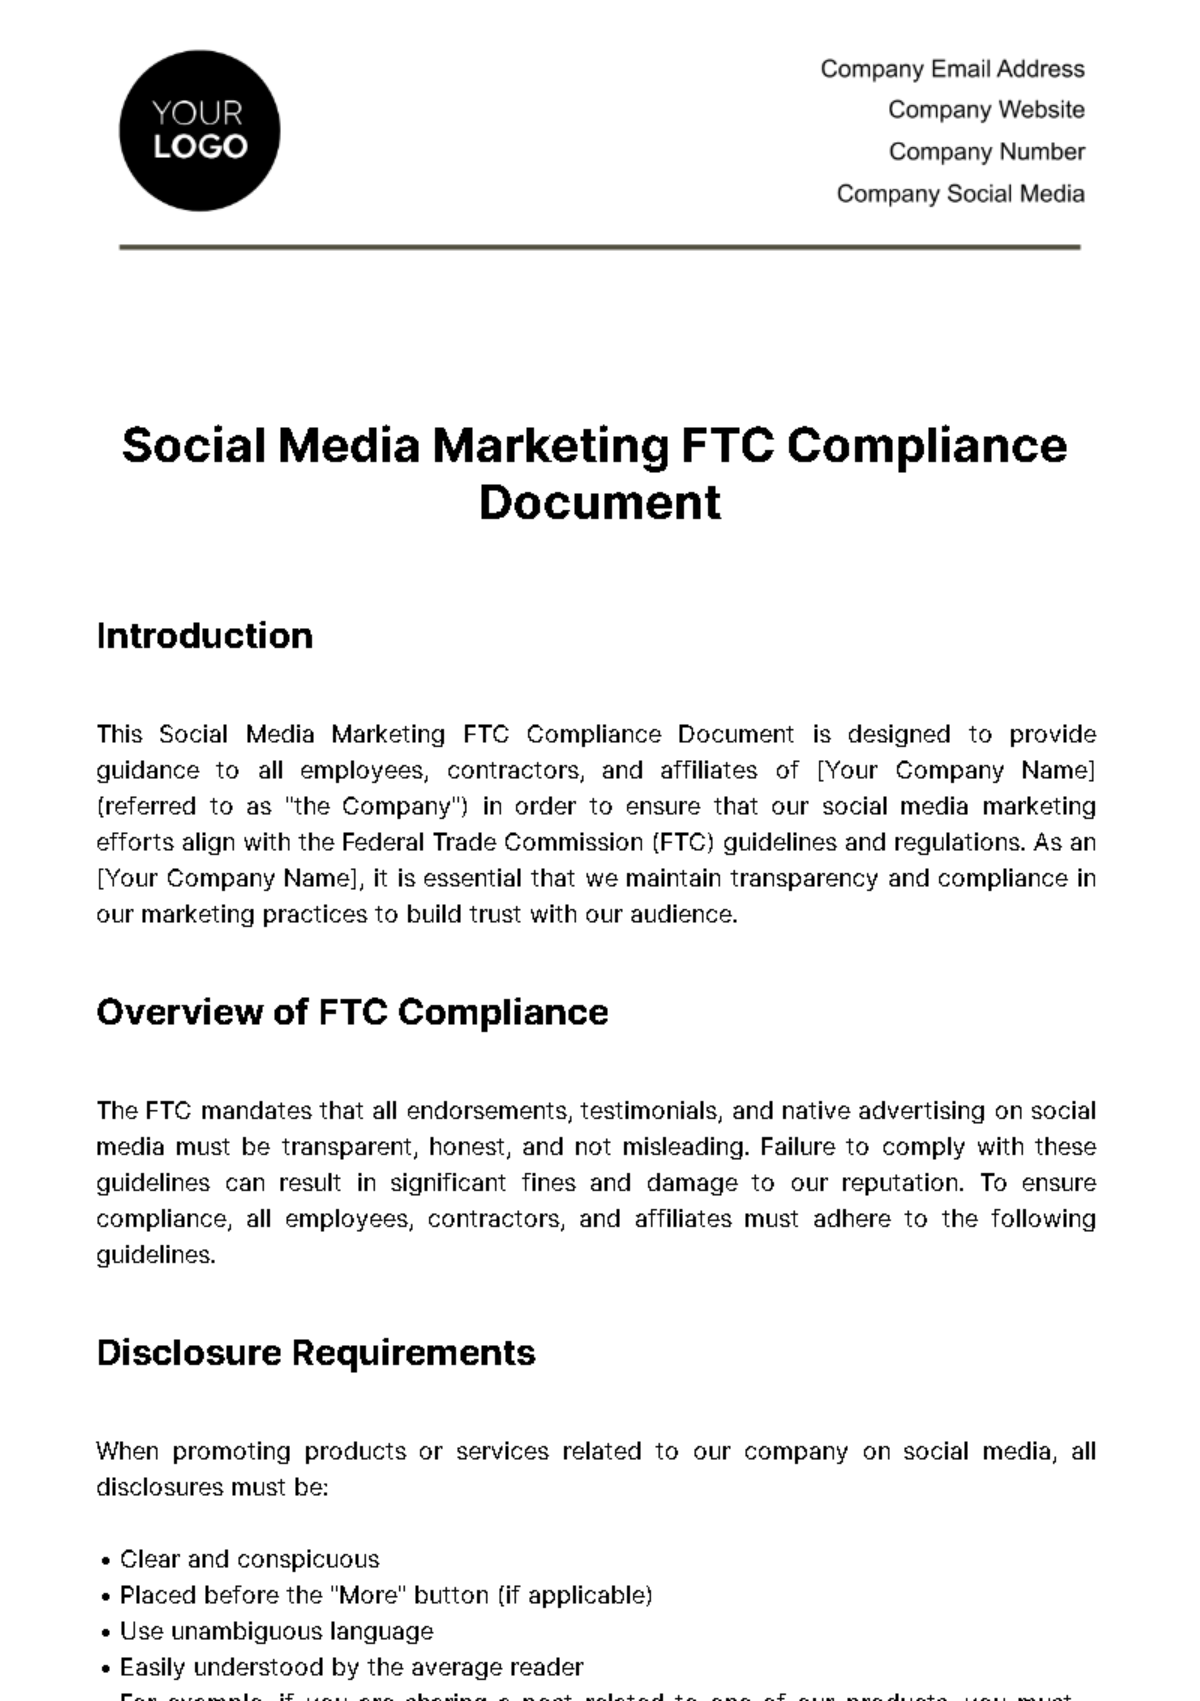 Free Social Media Marketing FTC Compliance Document Template